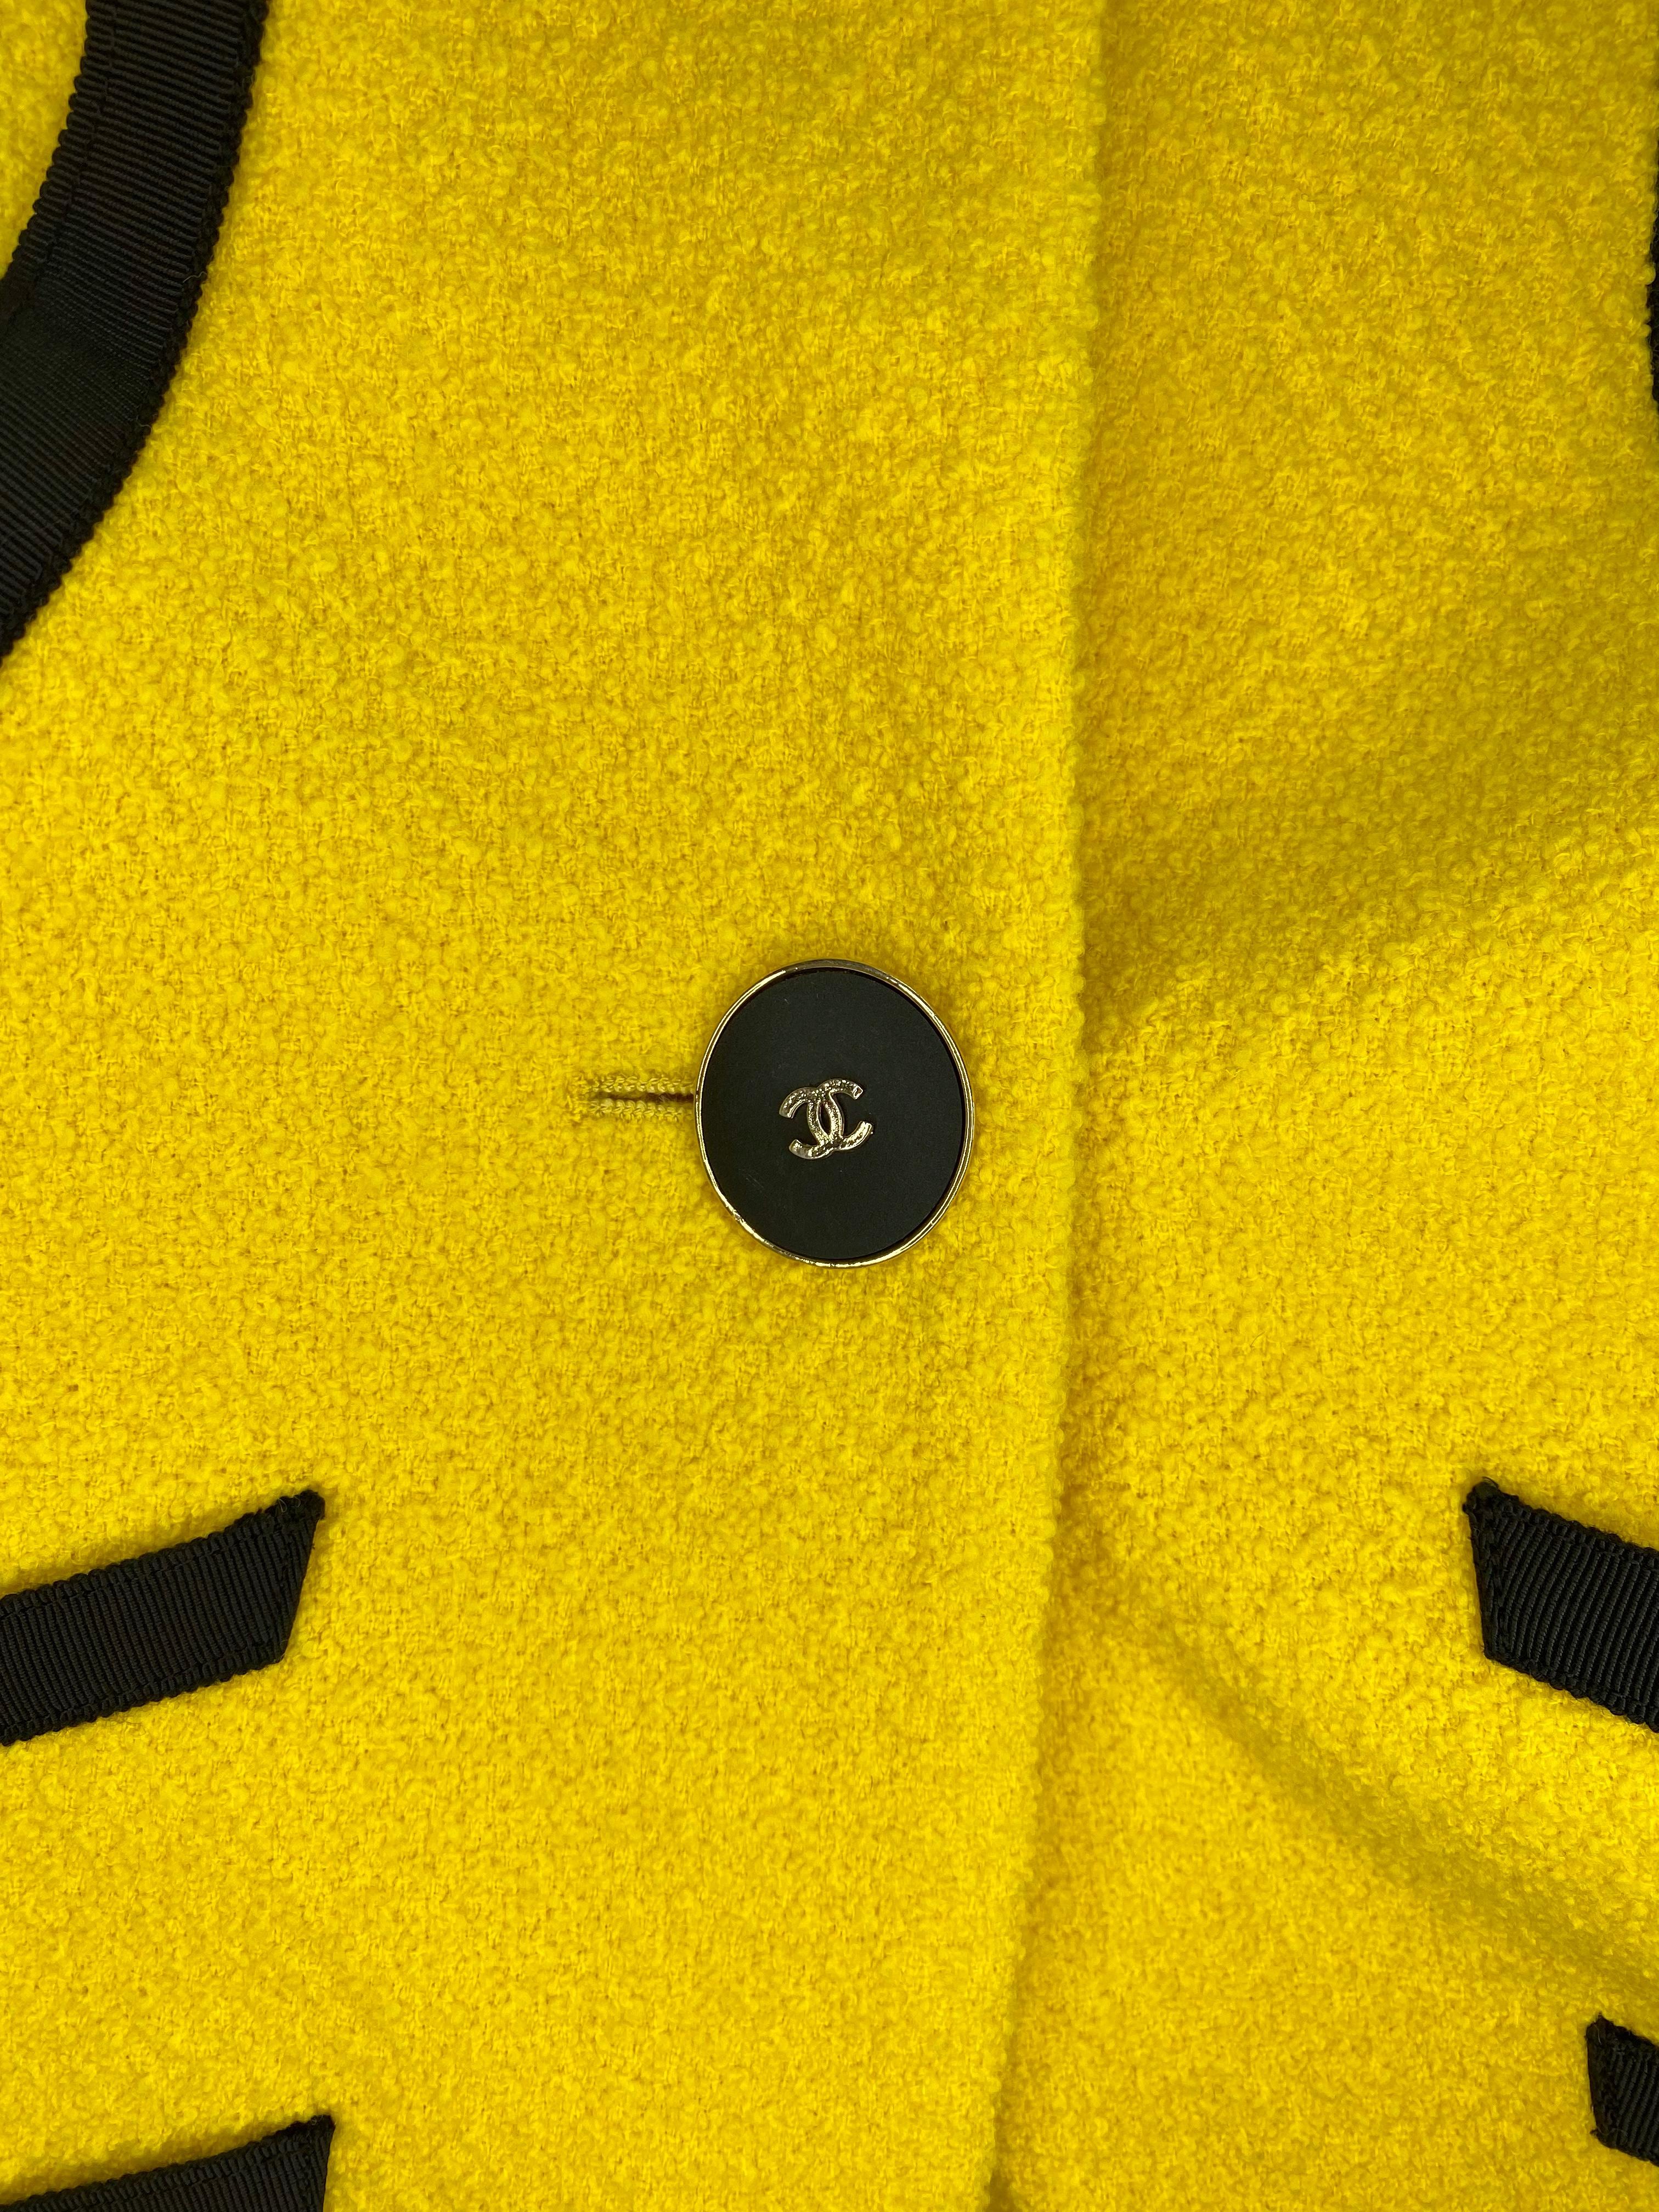 S/S 1991 Chanel by Karl Lagerfeld Canary Yellow Skirt Suit Documented For Sale 2